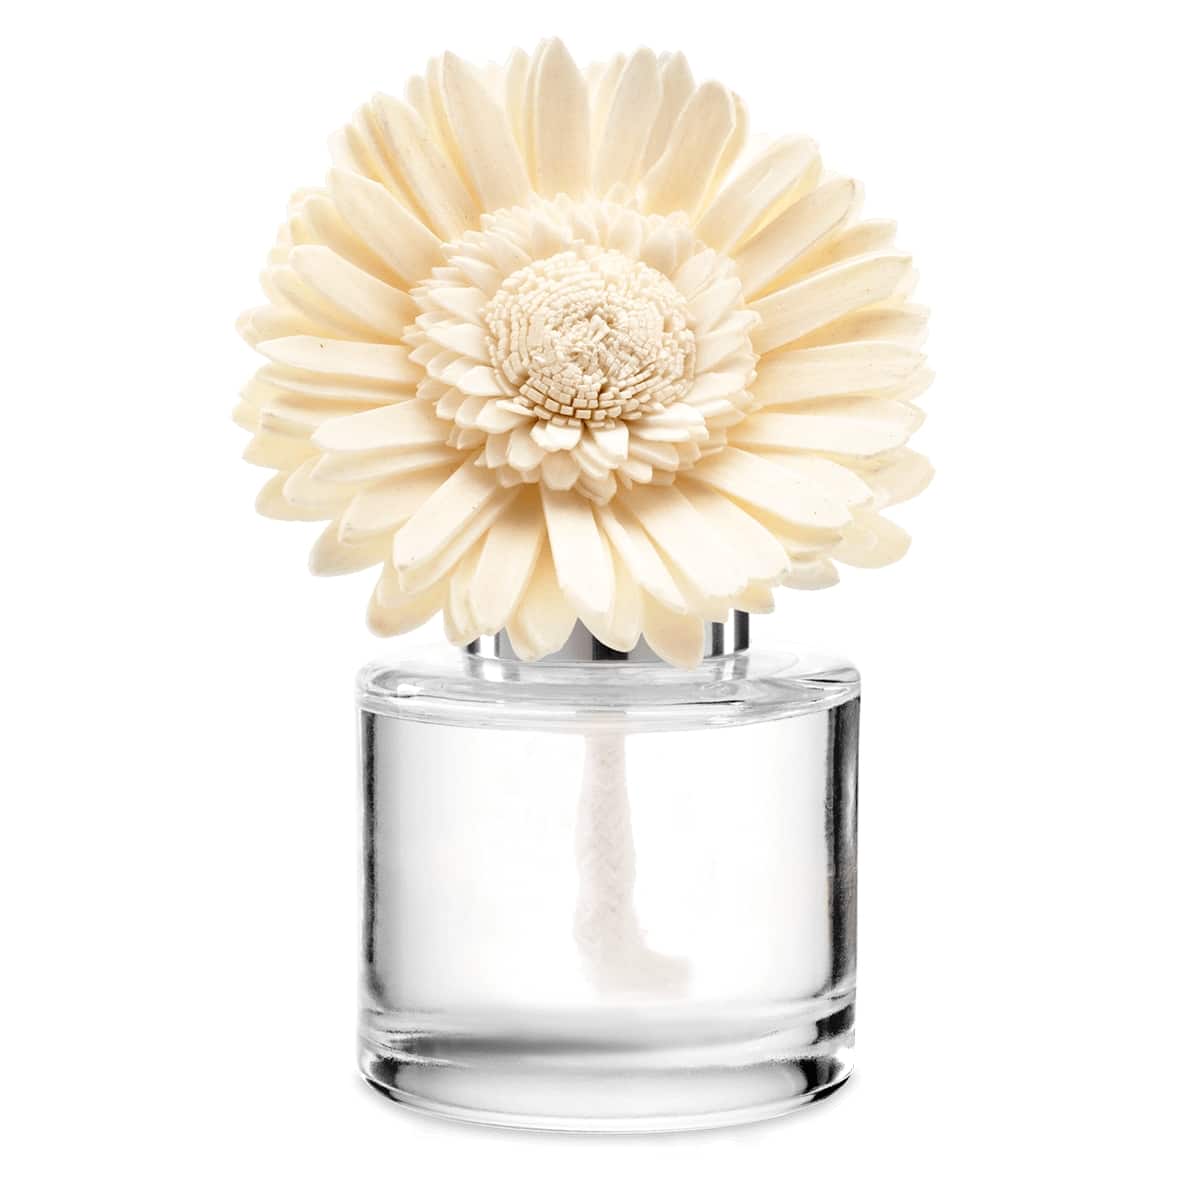 Pink Cotton Scentsy Fragrance Flower – Dainty Daisy - The Candle